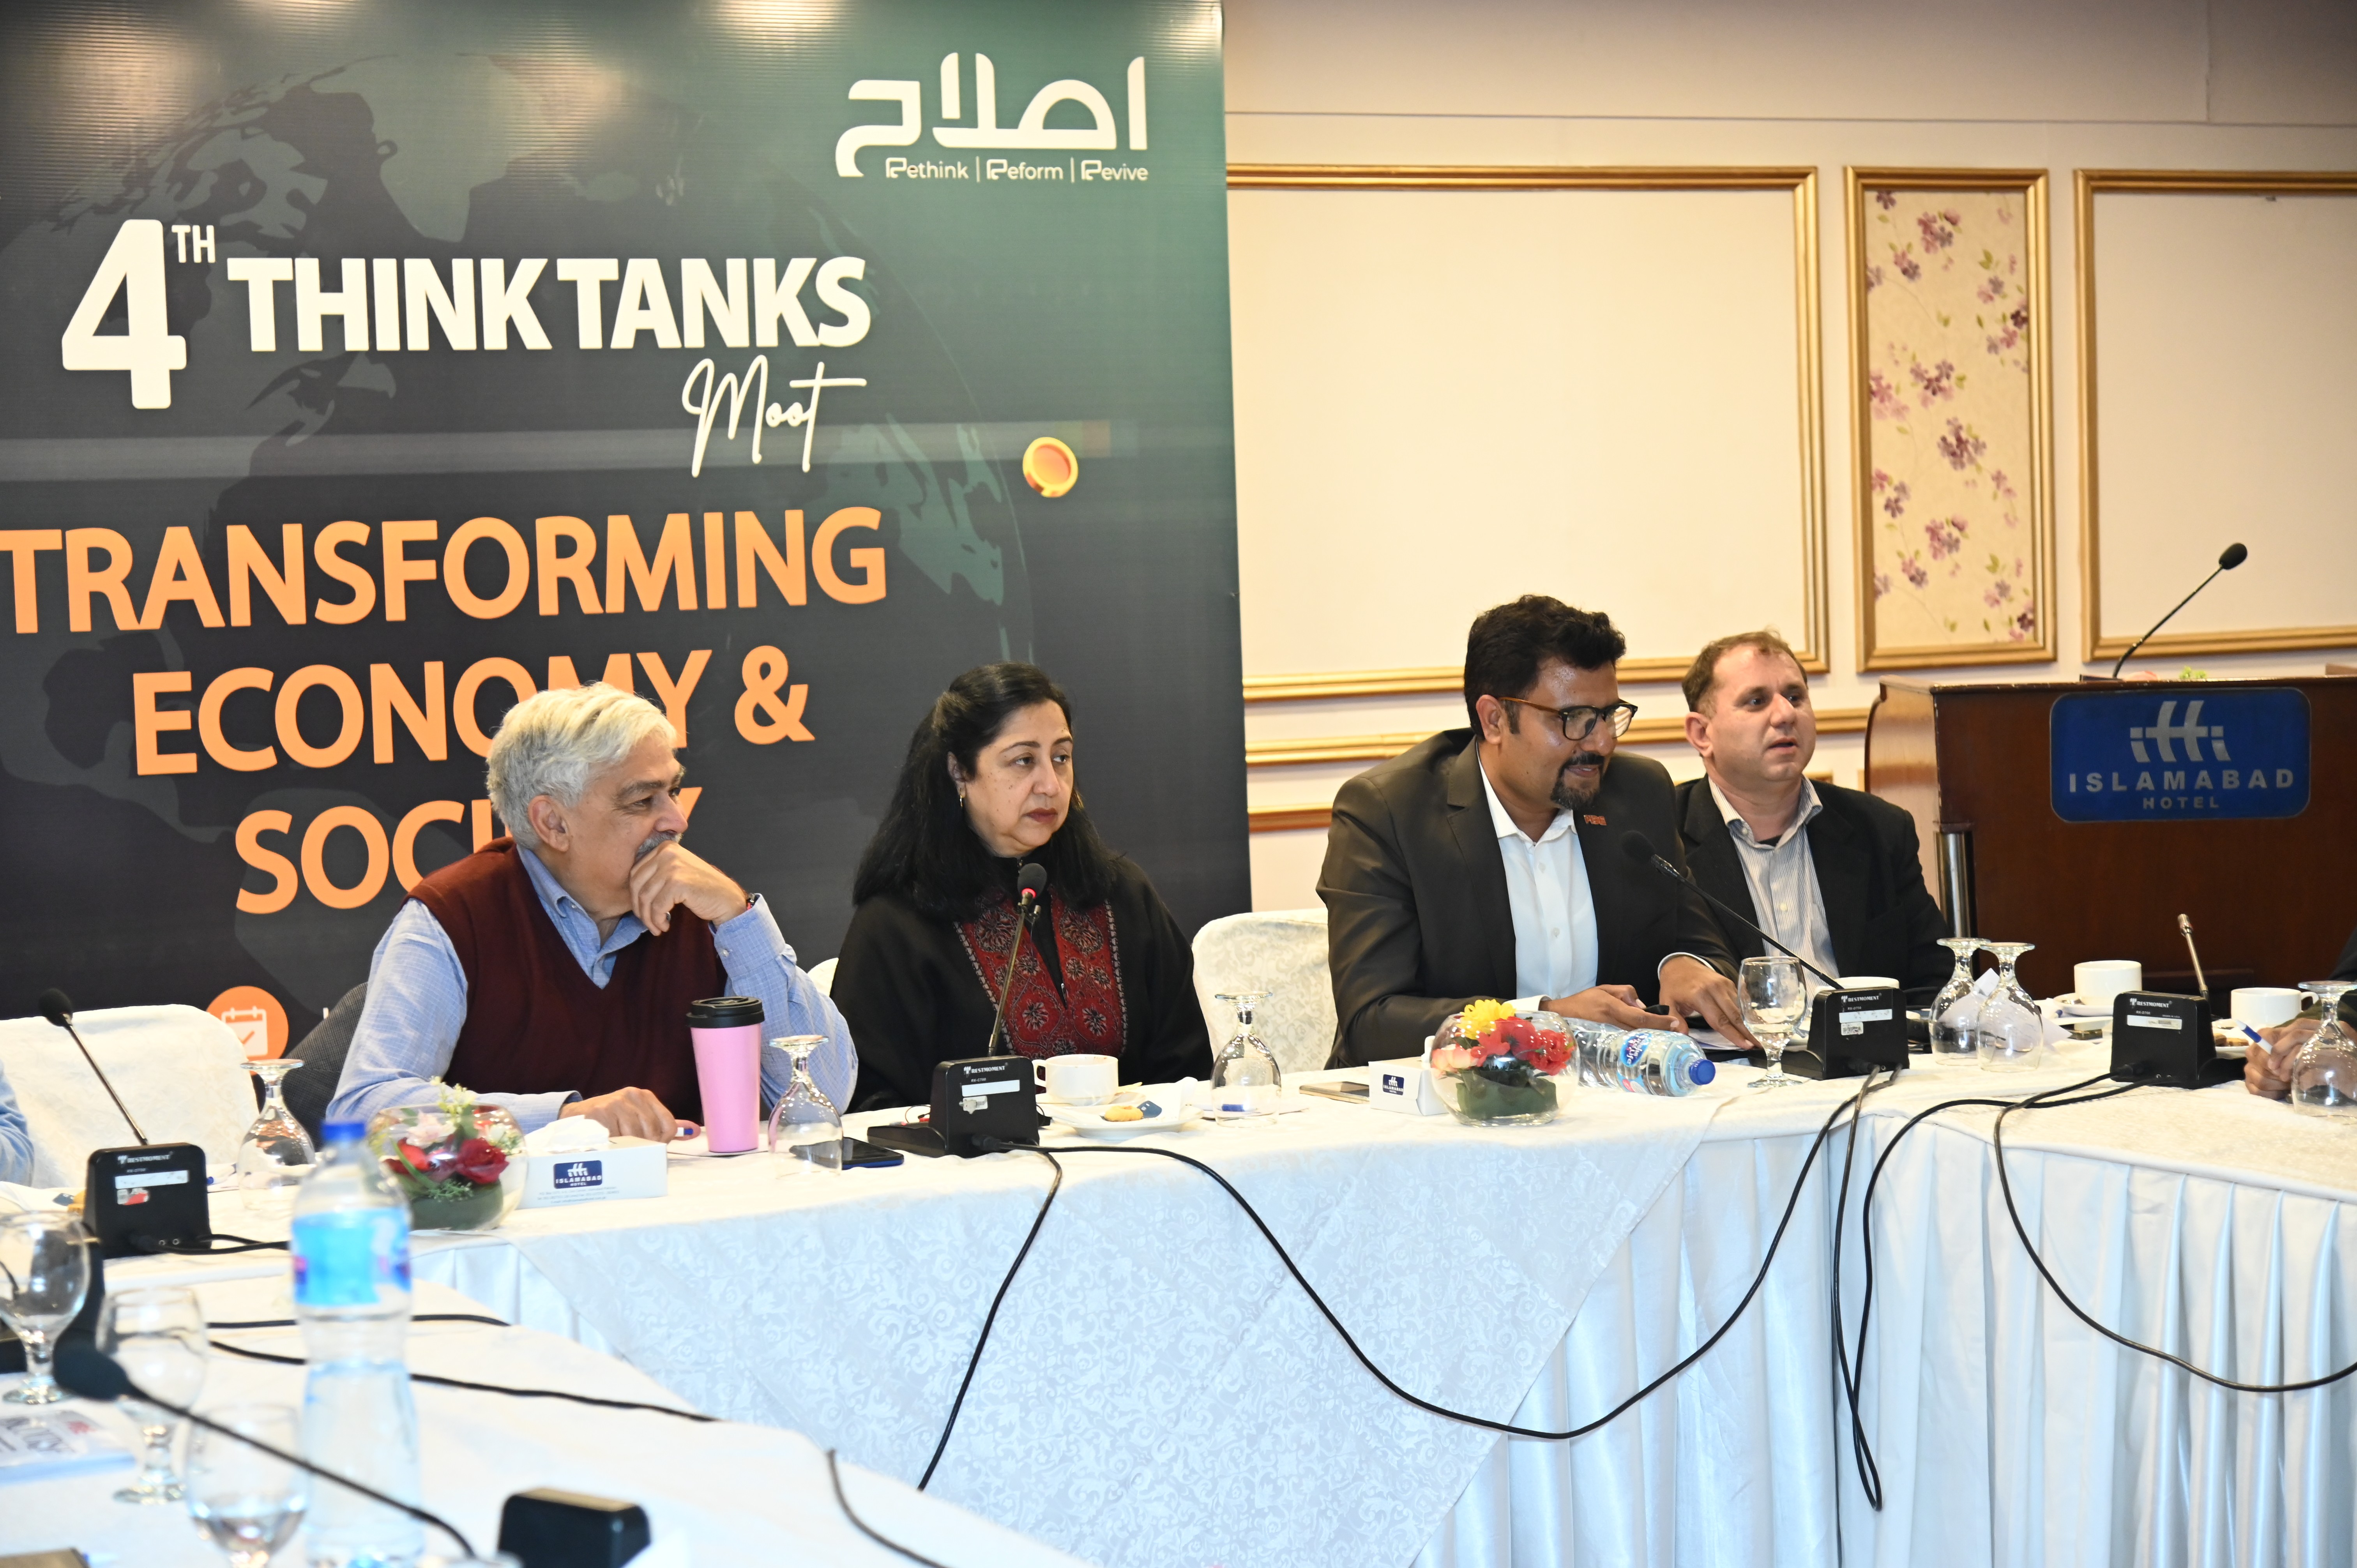 The Panelists from Pakistan Institute of Development Economics - PIDE at the 4th think tank moot, exploring ways to transform our economy and society